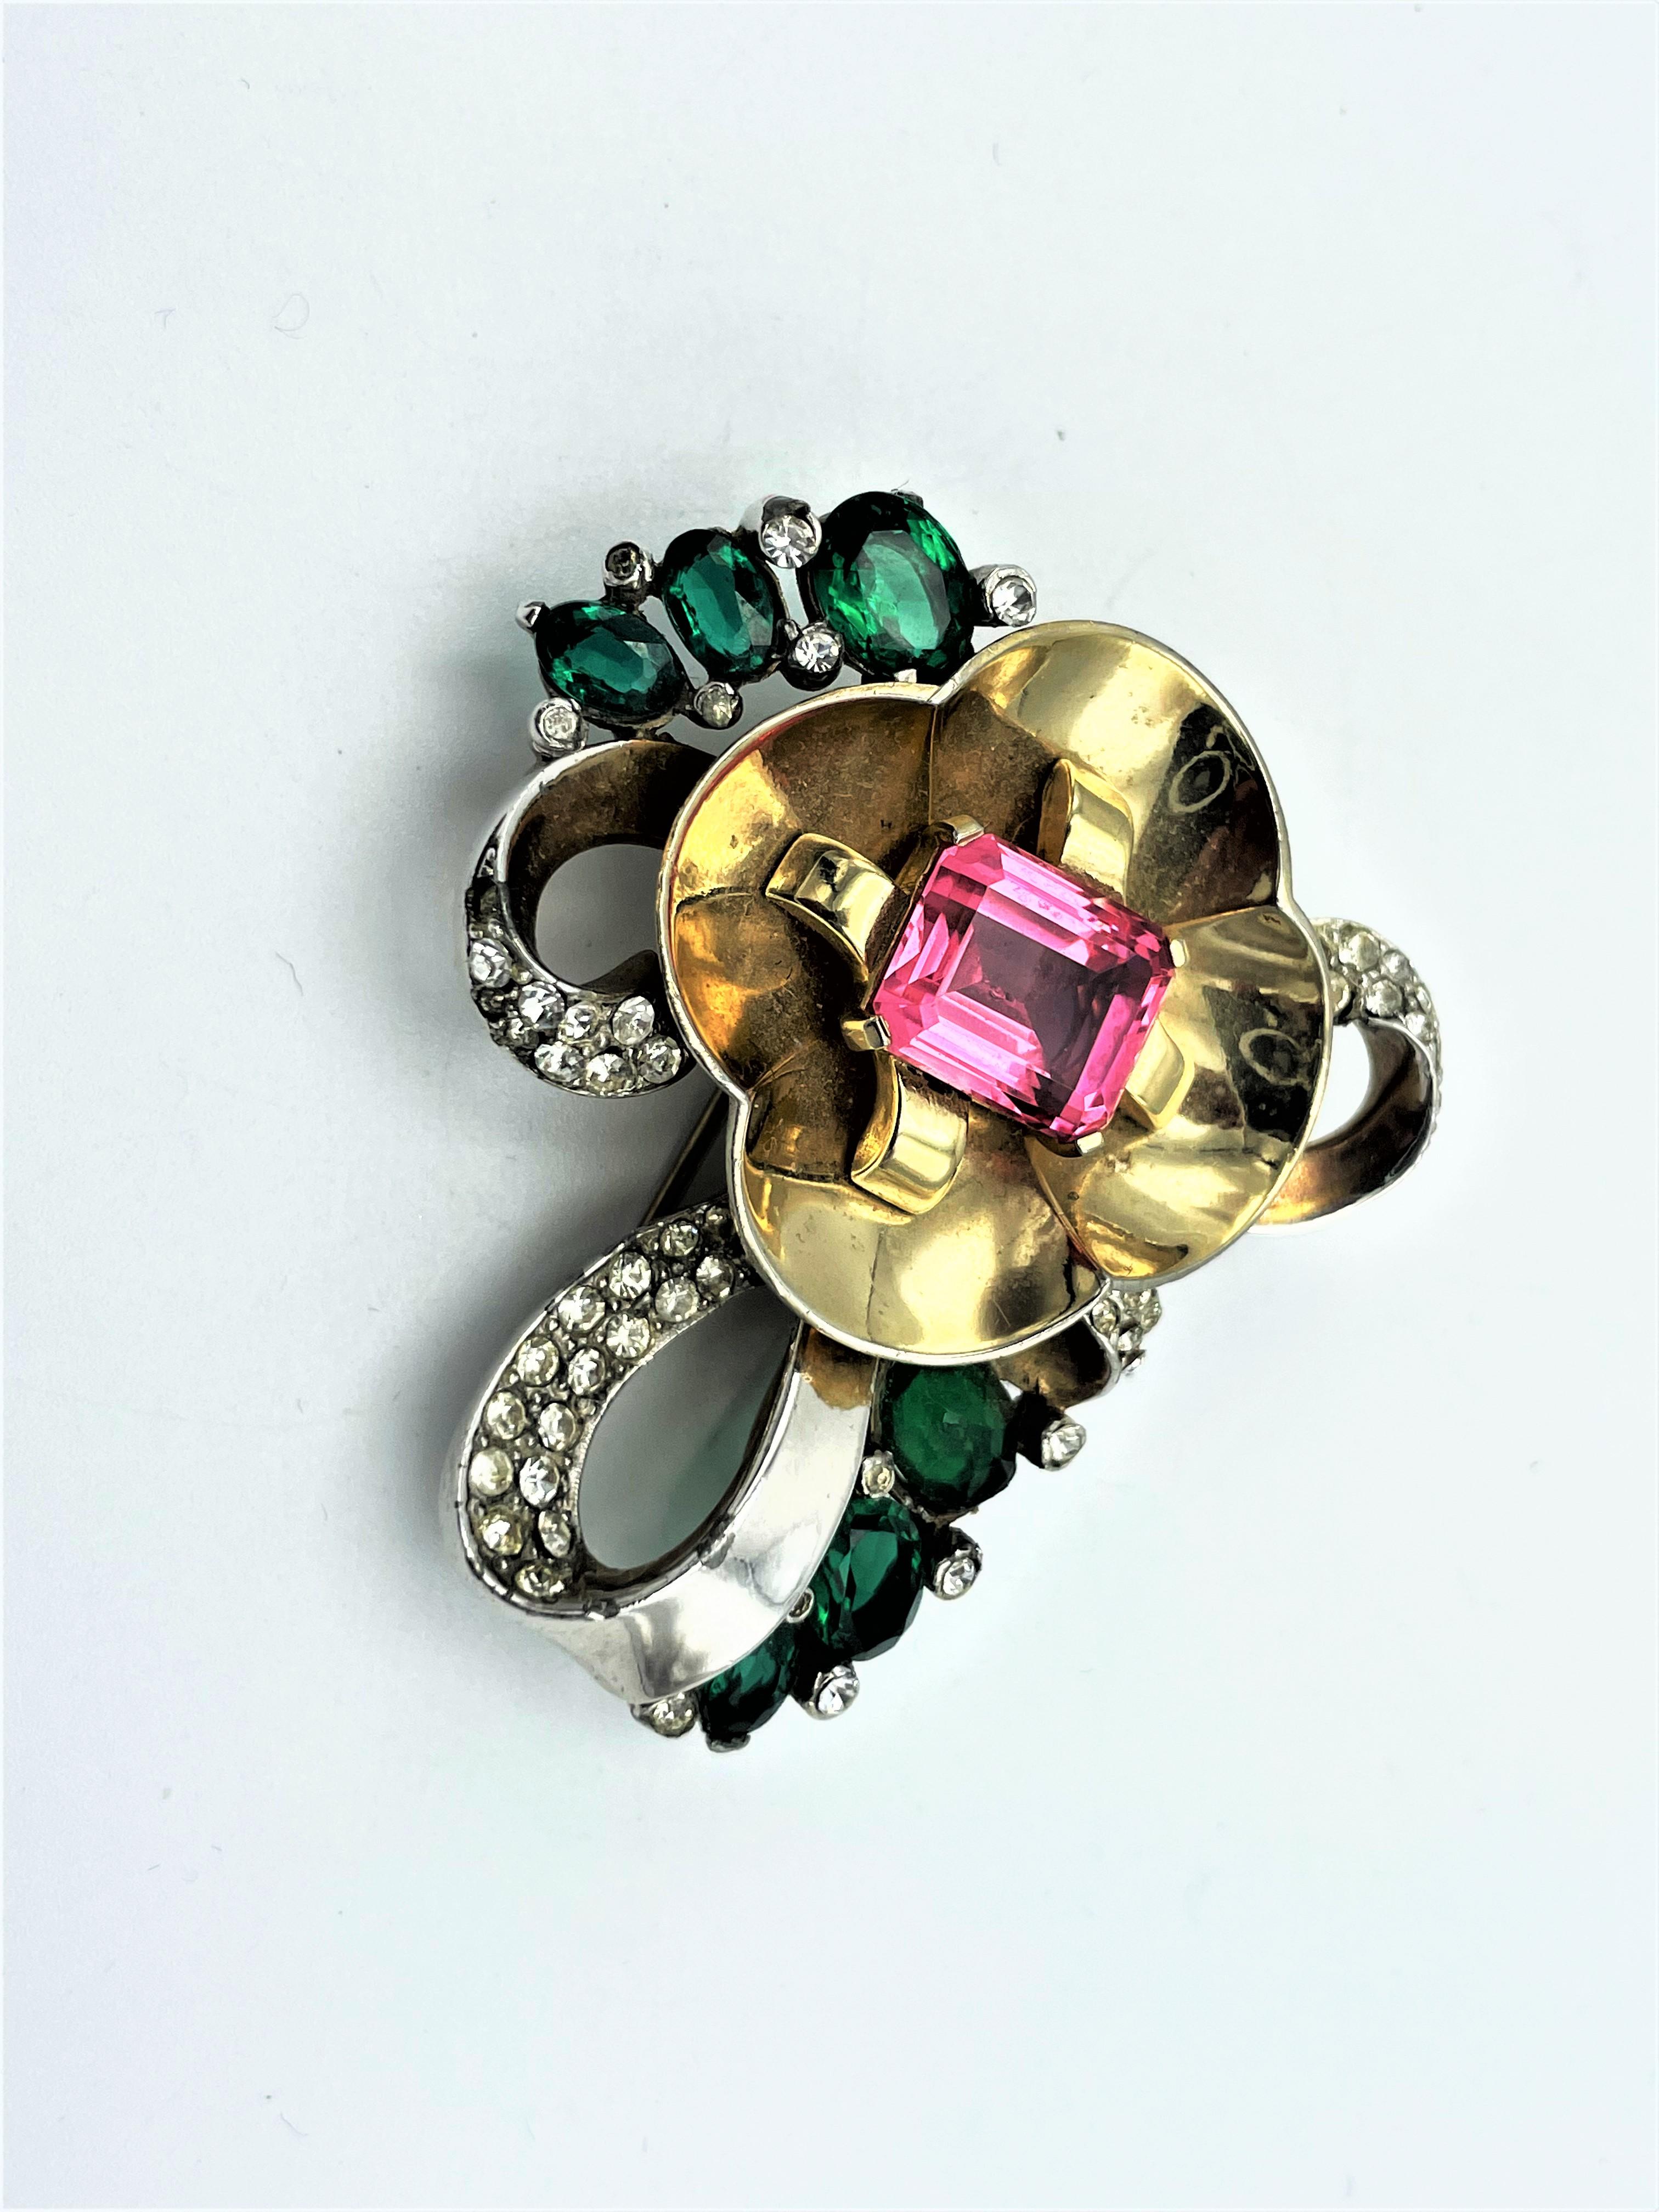 Early Mazer clip brooch with pink, green and rhinestones. Rodium plated metal and gold plated the flower. Comes from the USA 1940s, signed on the back.
There are 2 small safety pins on the back and between the needles!

Size: 5cm x 5 cm good